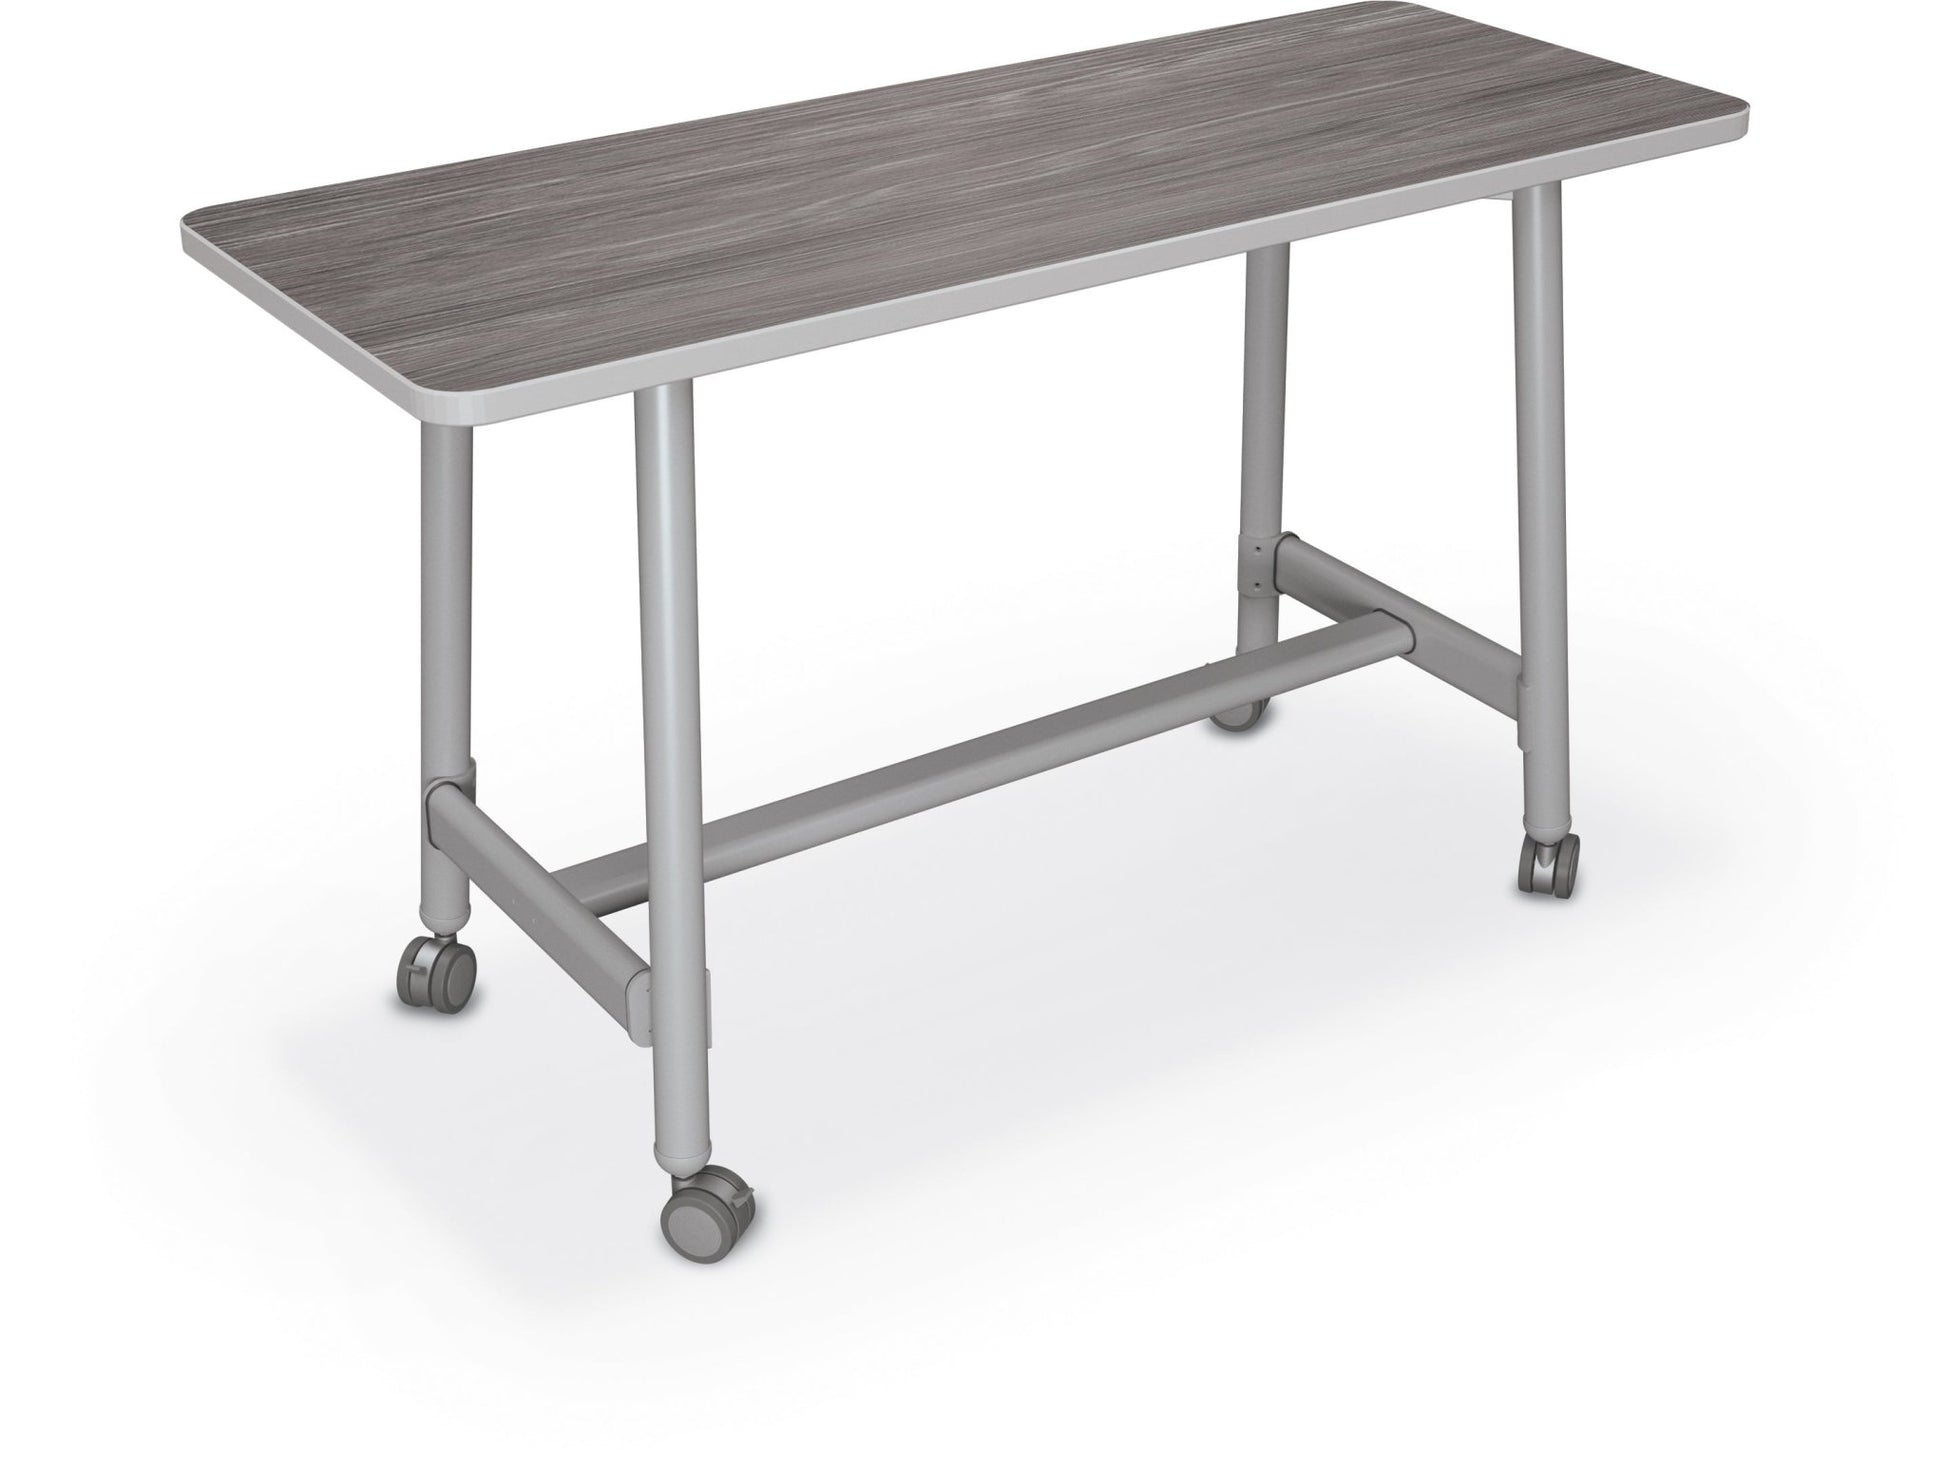 Mooreco Akt Table – 20"D x 60"W Rectangle, Laminate Top, Fixed Height Available in 29"H, 36"H, or 42"H - SchoolOutlet